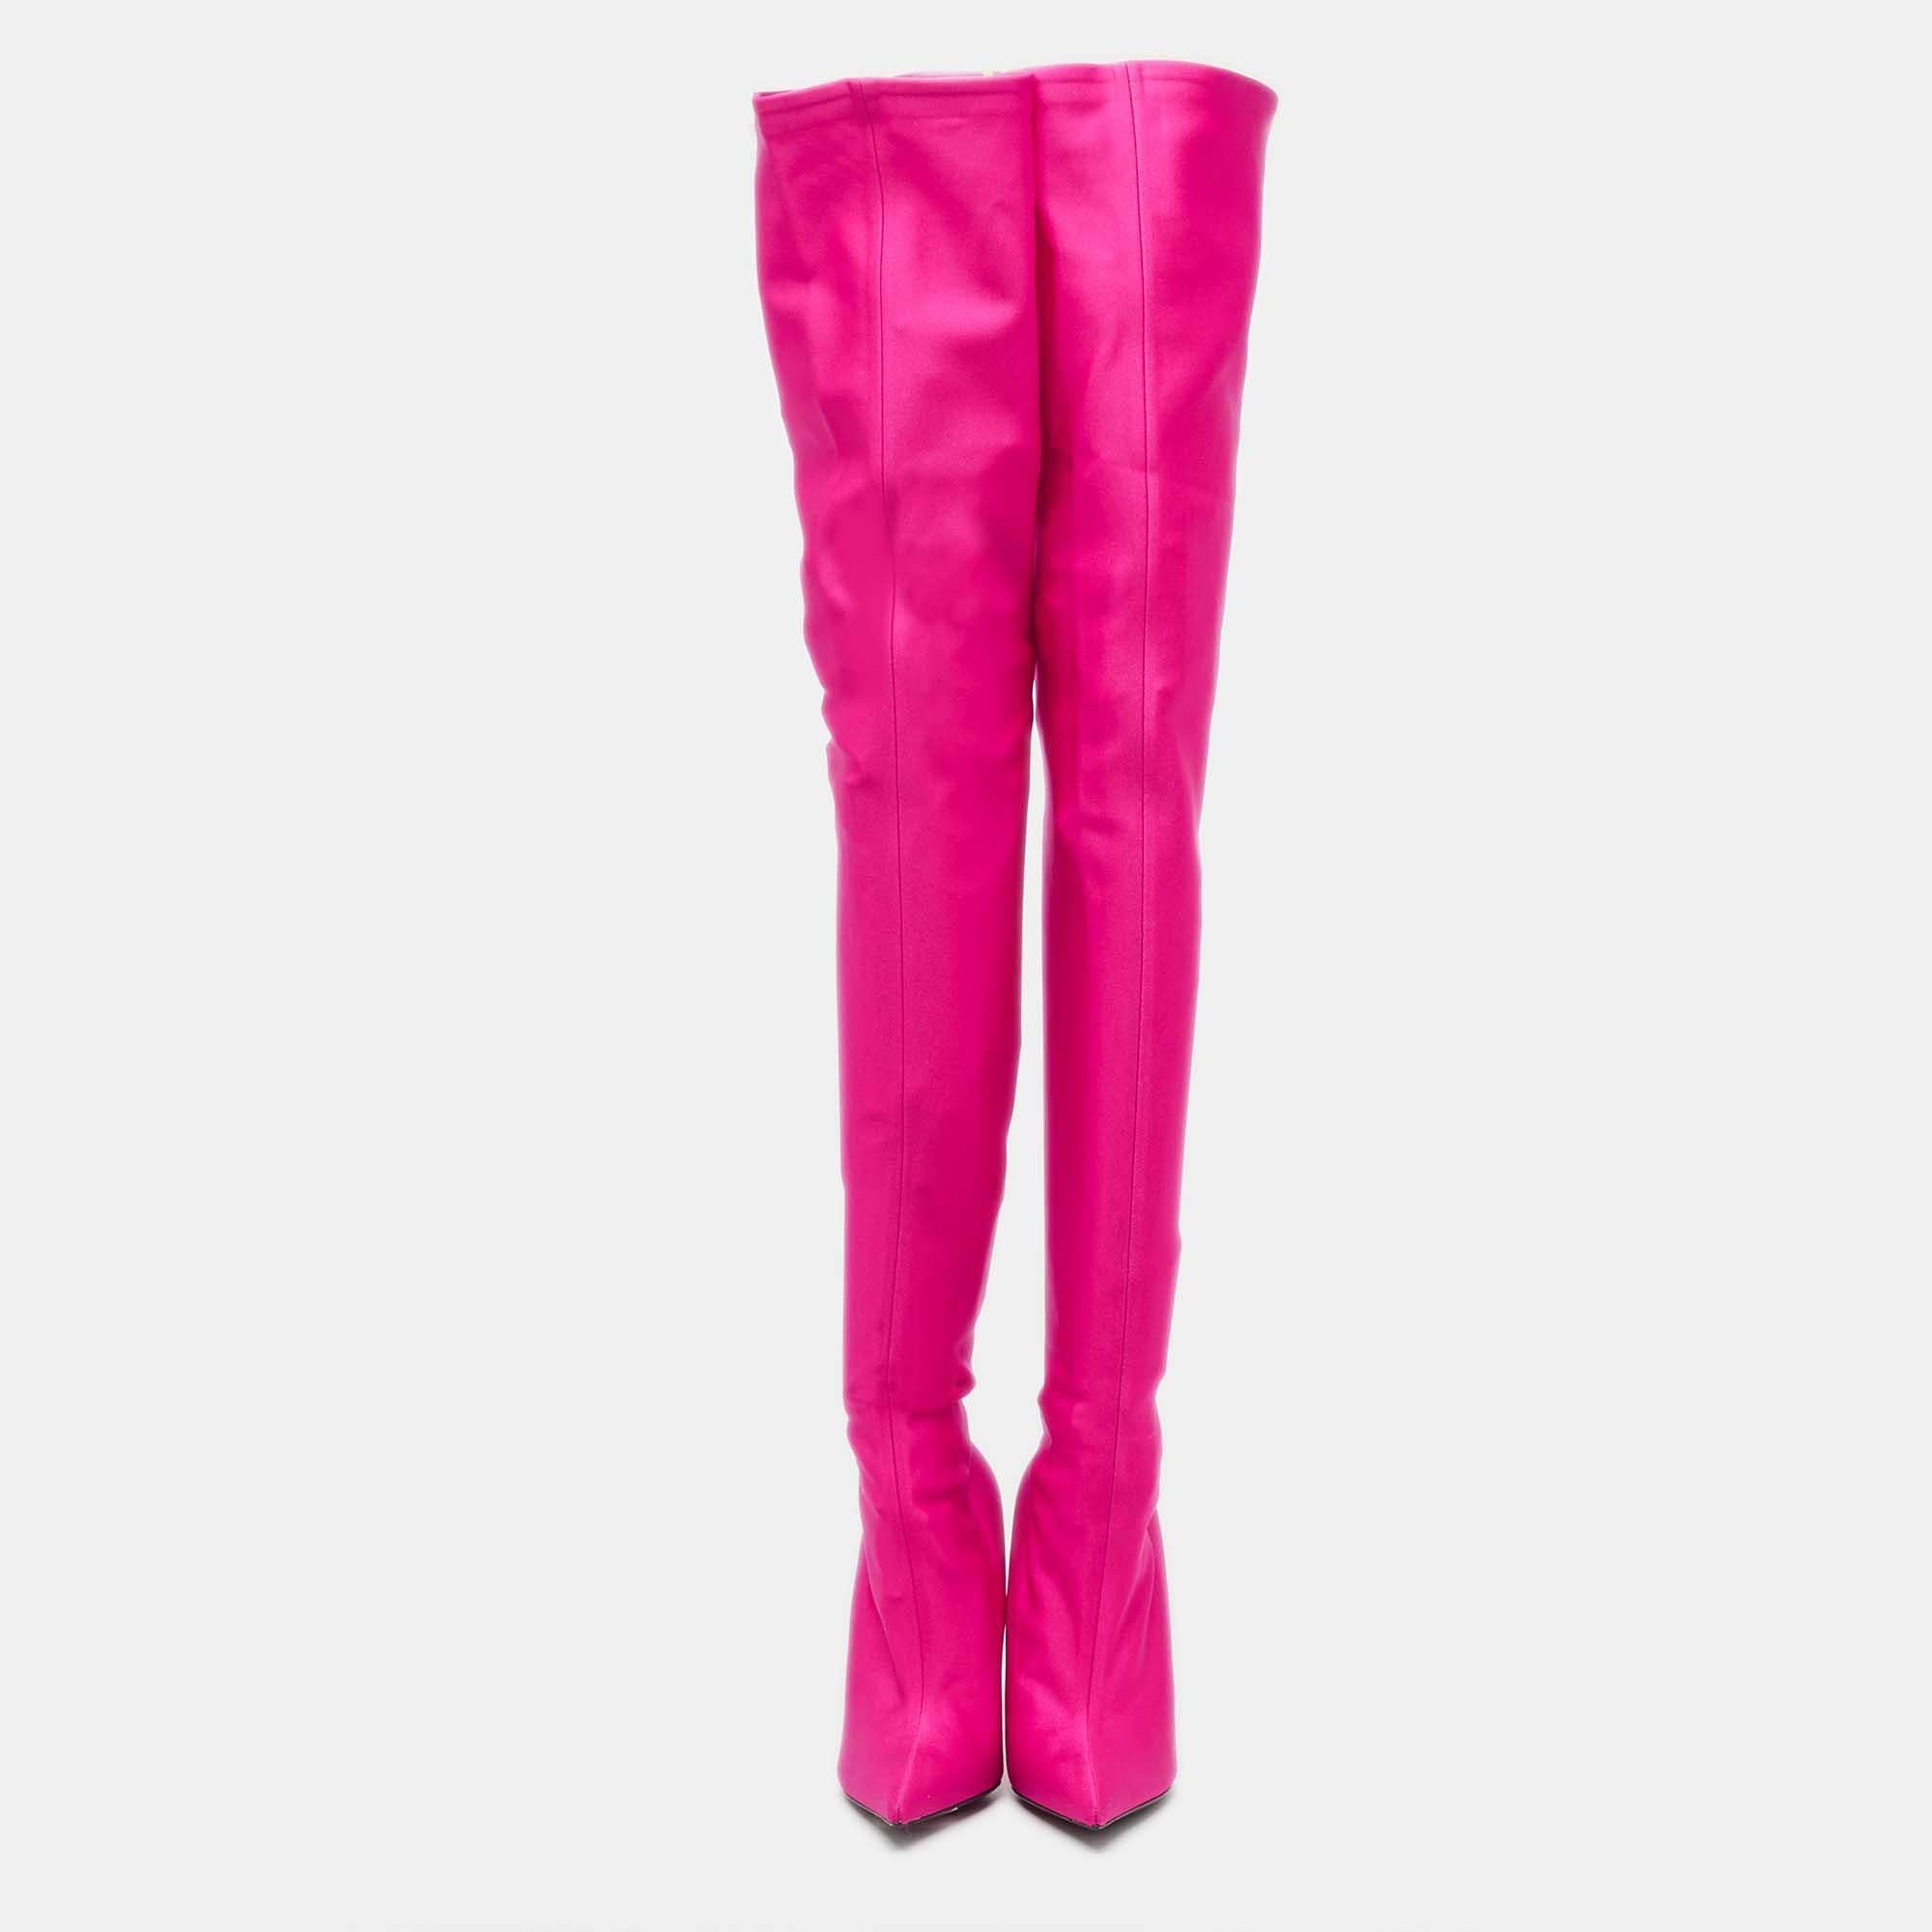 Crafted with finesse, the Balenciaga Knife boots are such a statement pair. The vibrant pink satin gracefully envelops your legs, while the sleek silhouette elongates your frame. With a pointed toe and a slender heel, these boots effortlessly blend